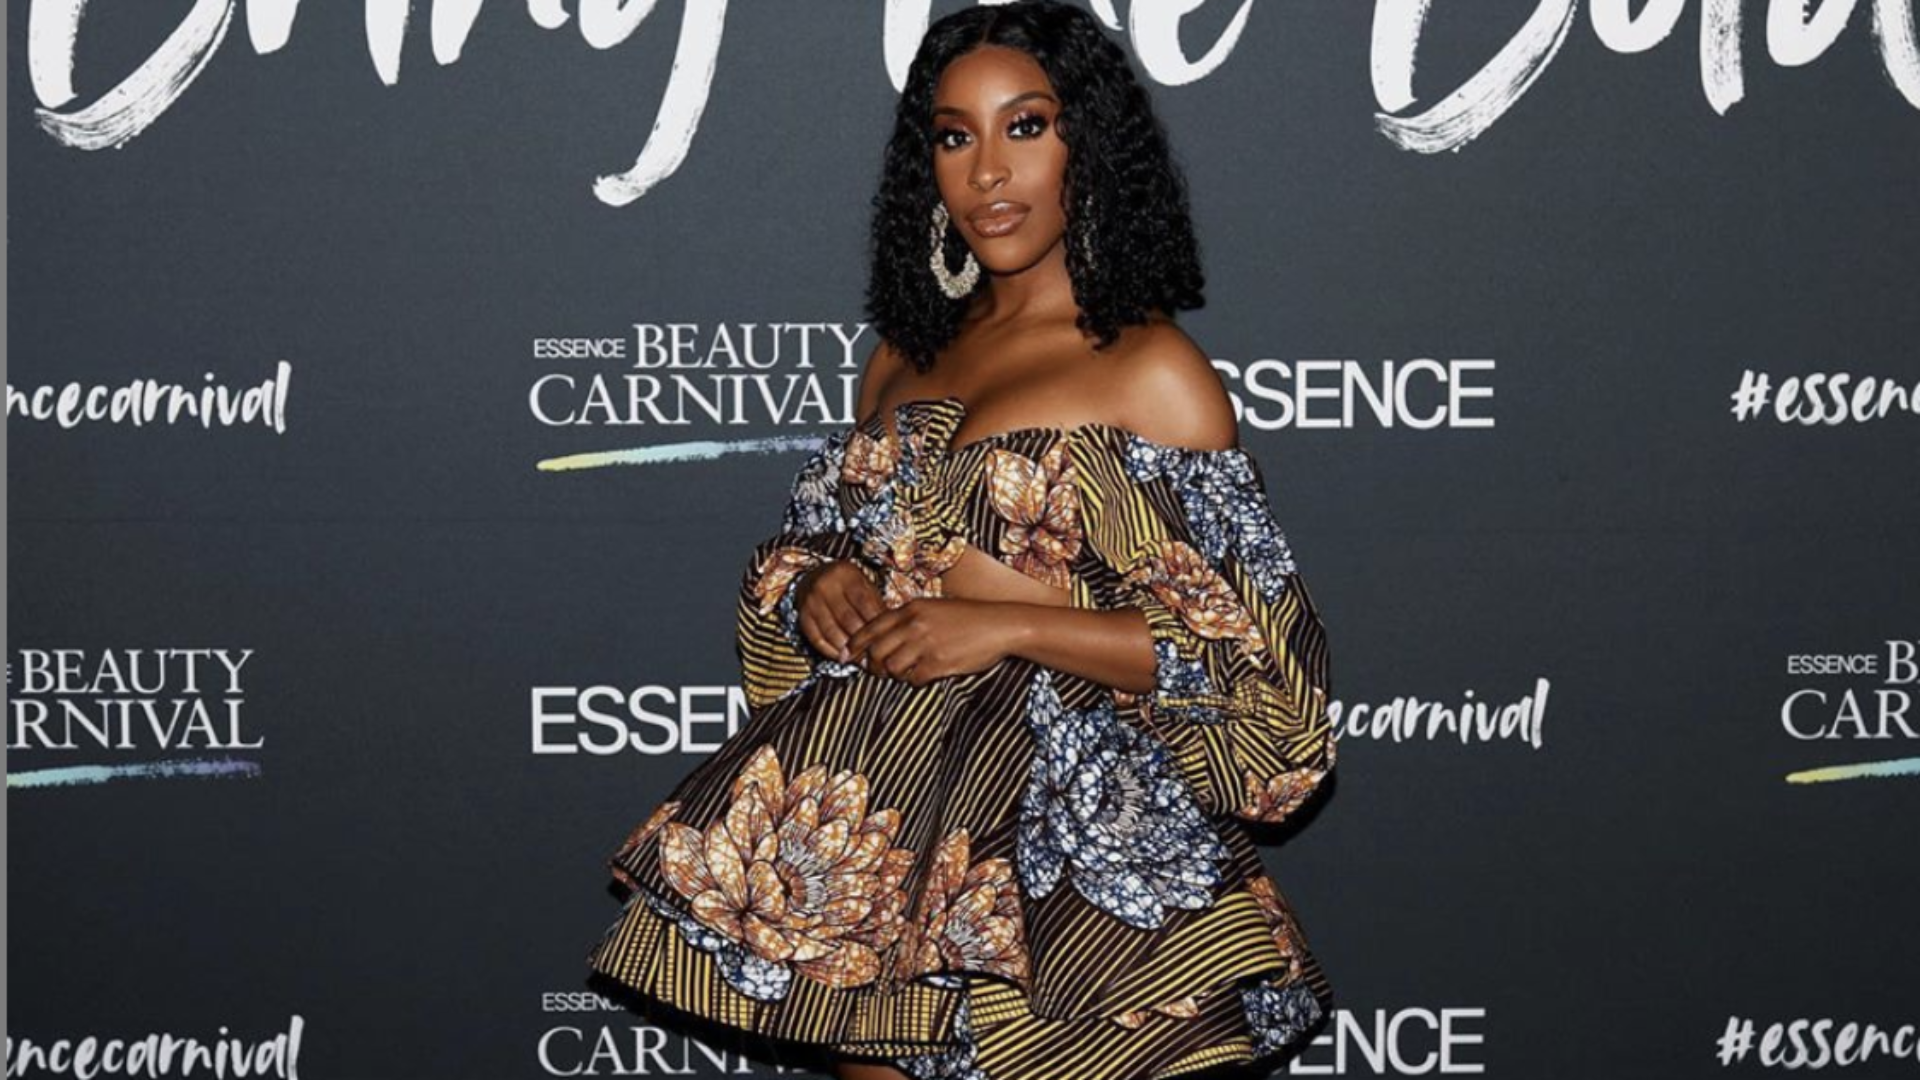 Jackie Aina Wants To Teach Young Black Women About Healthy Relationships